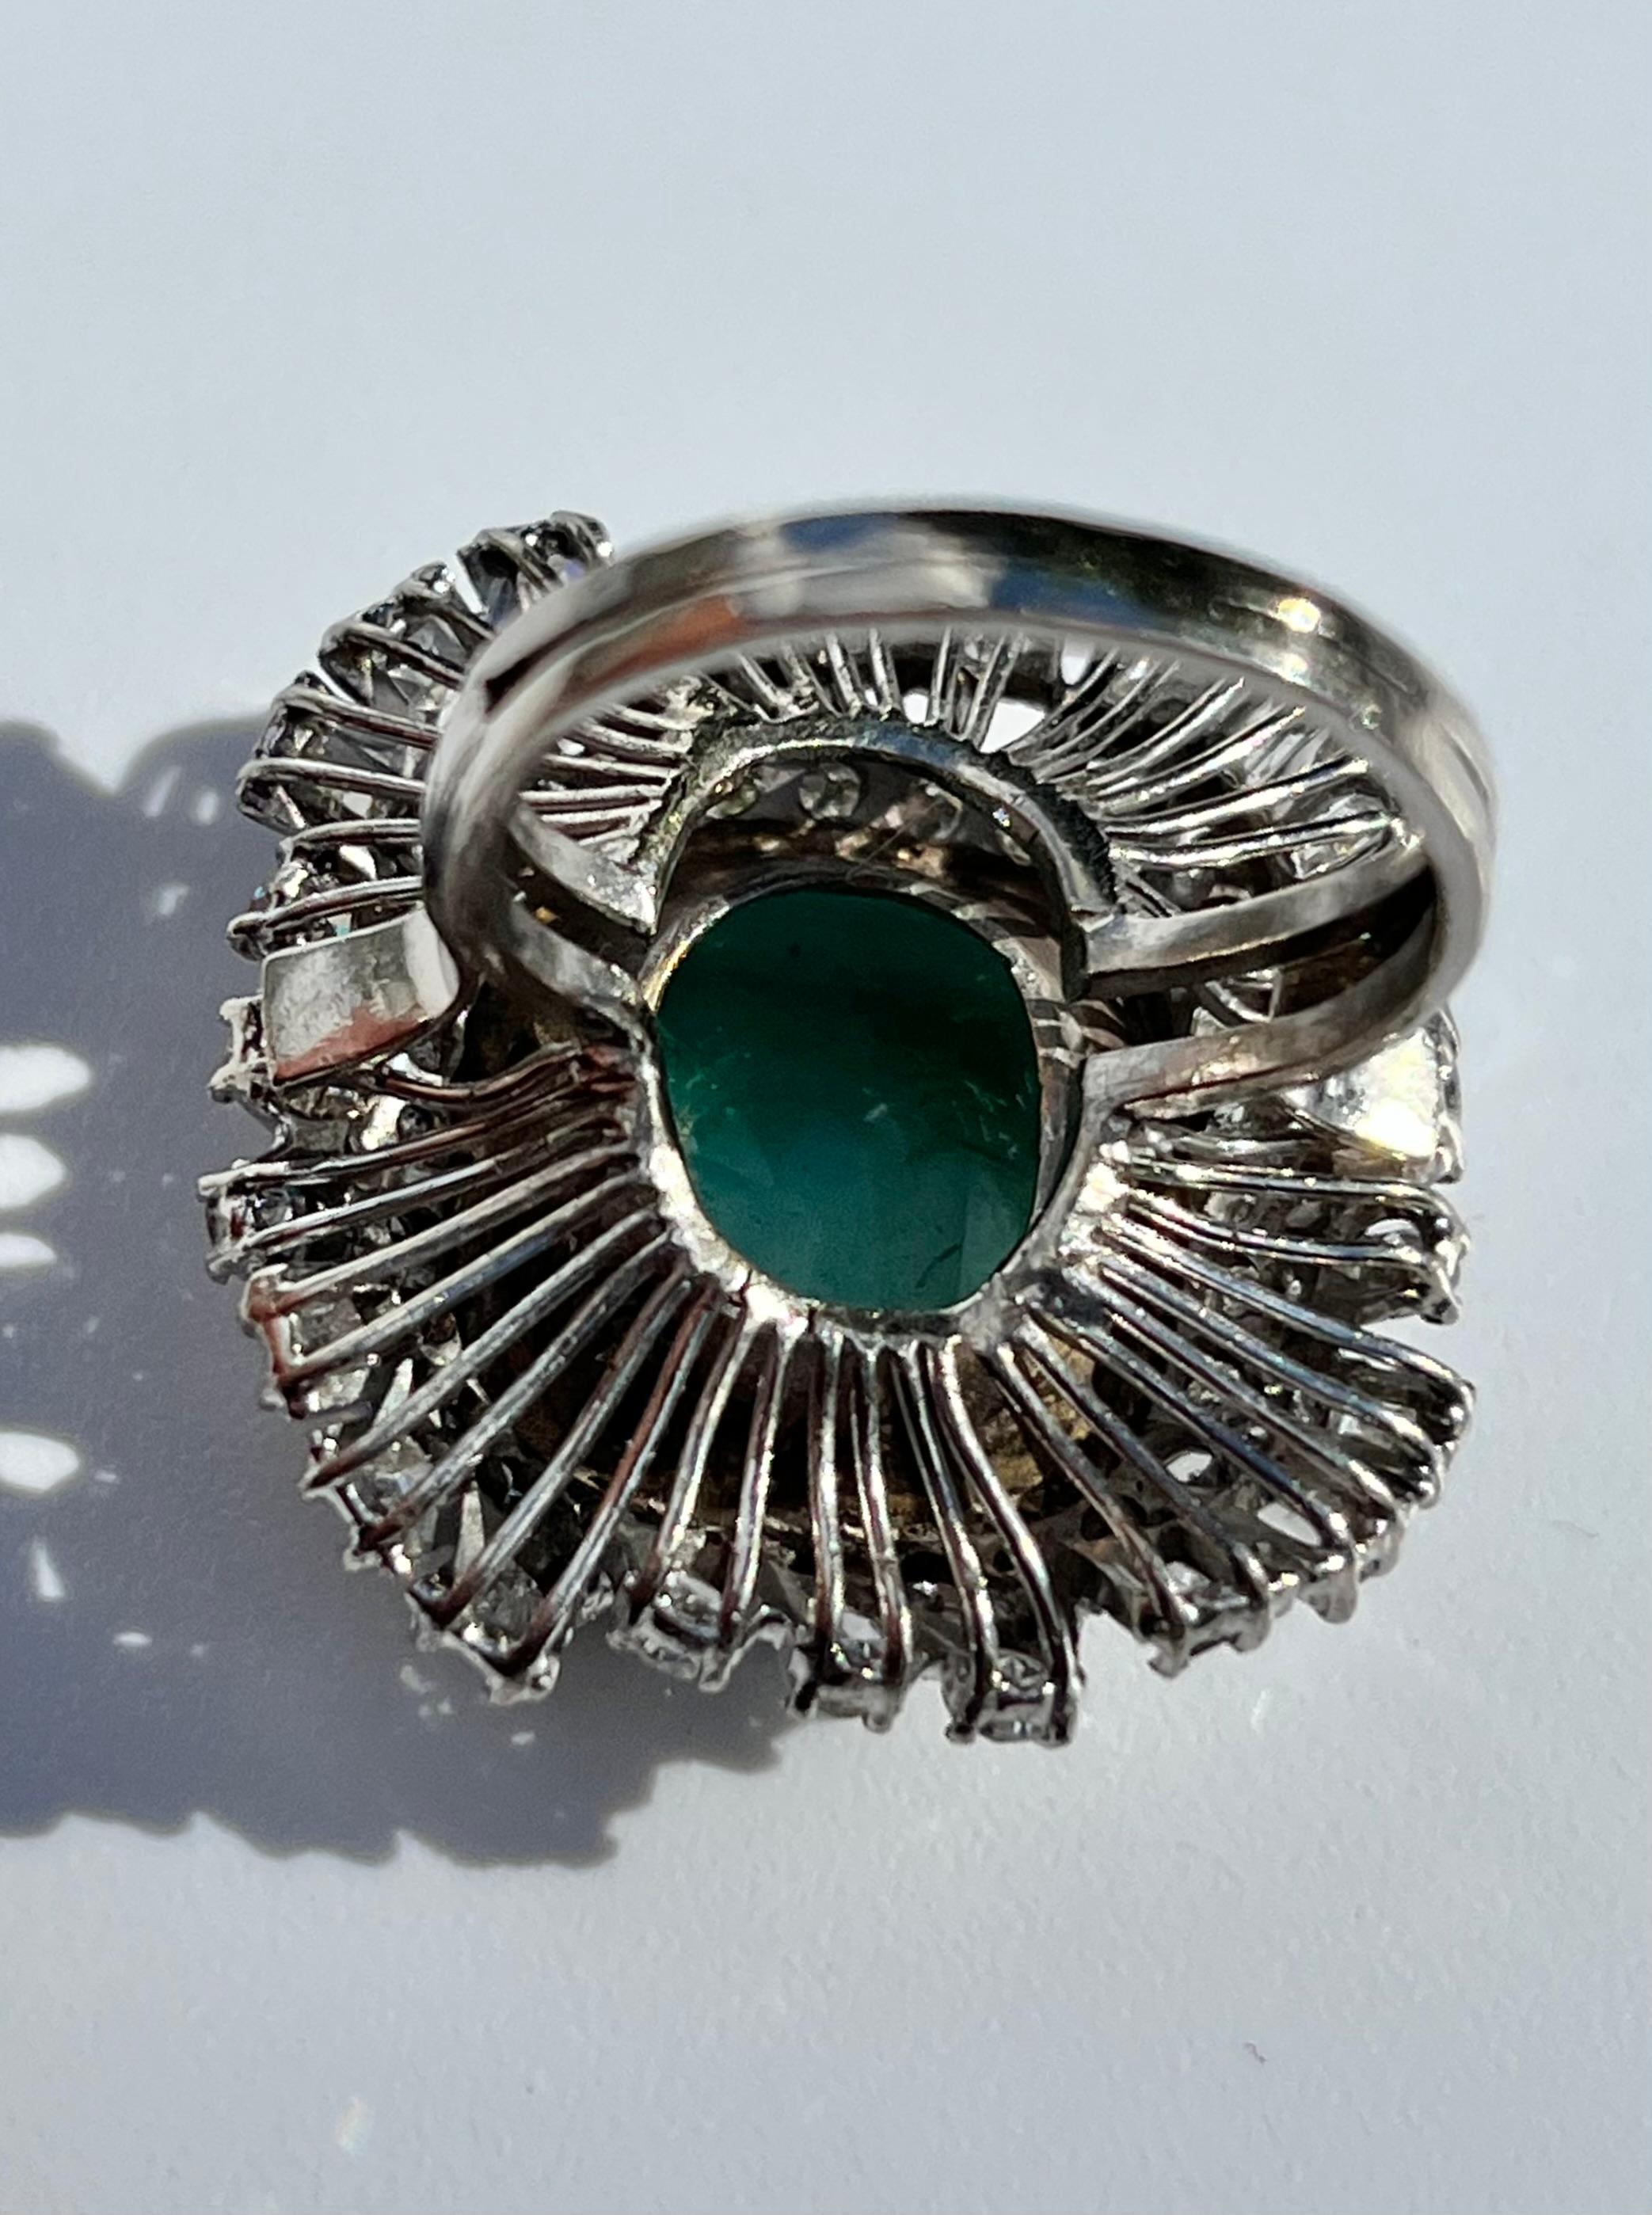 Women's Vintage 12 Carat Colombian Emerald and Diamond Halo Ring Set in Palladium For Sale